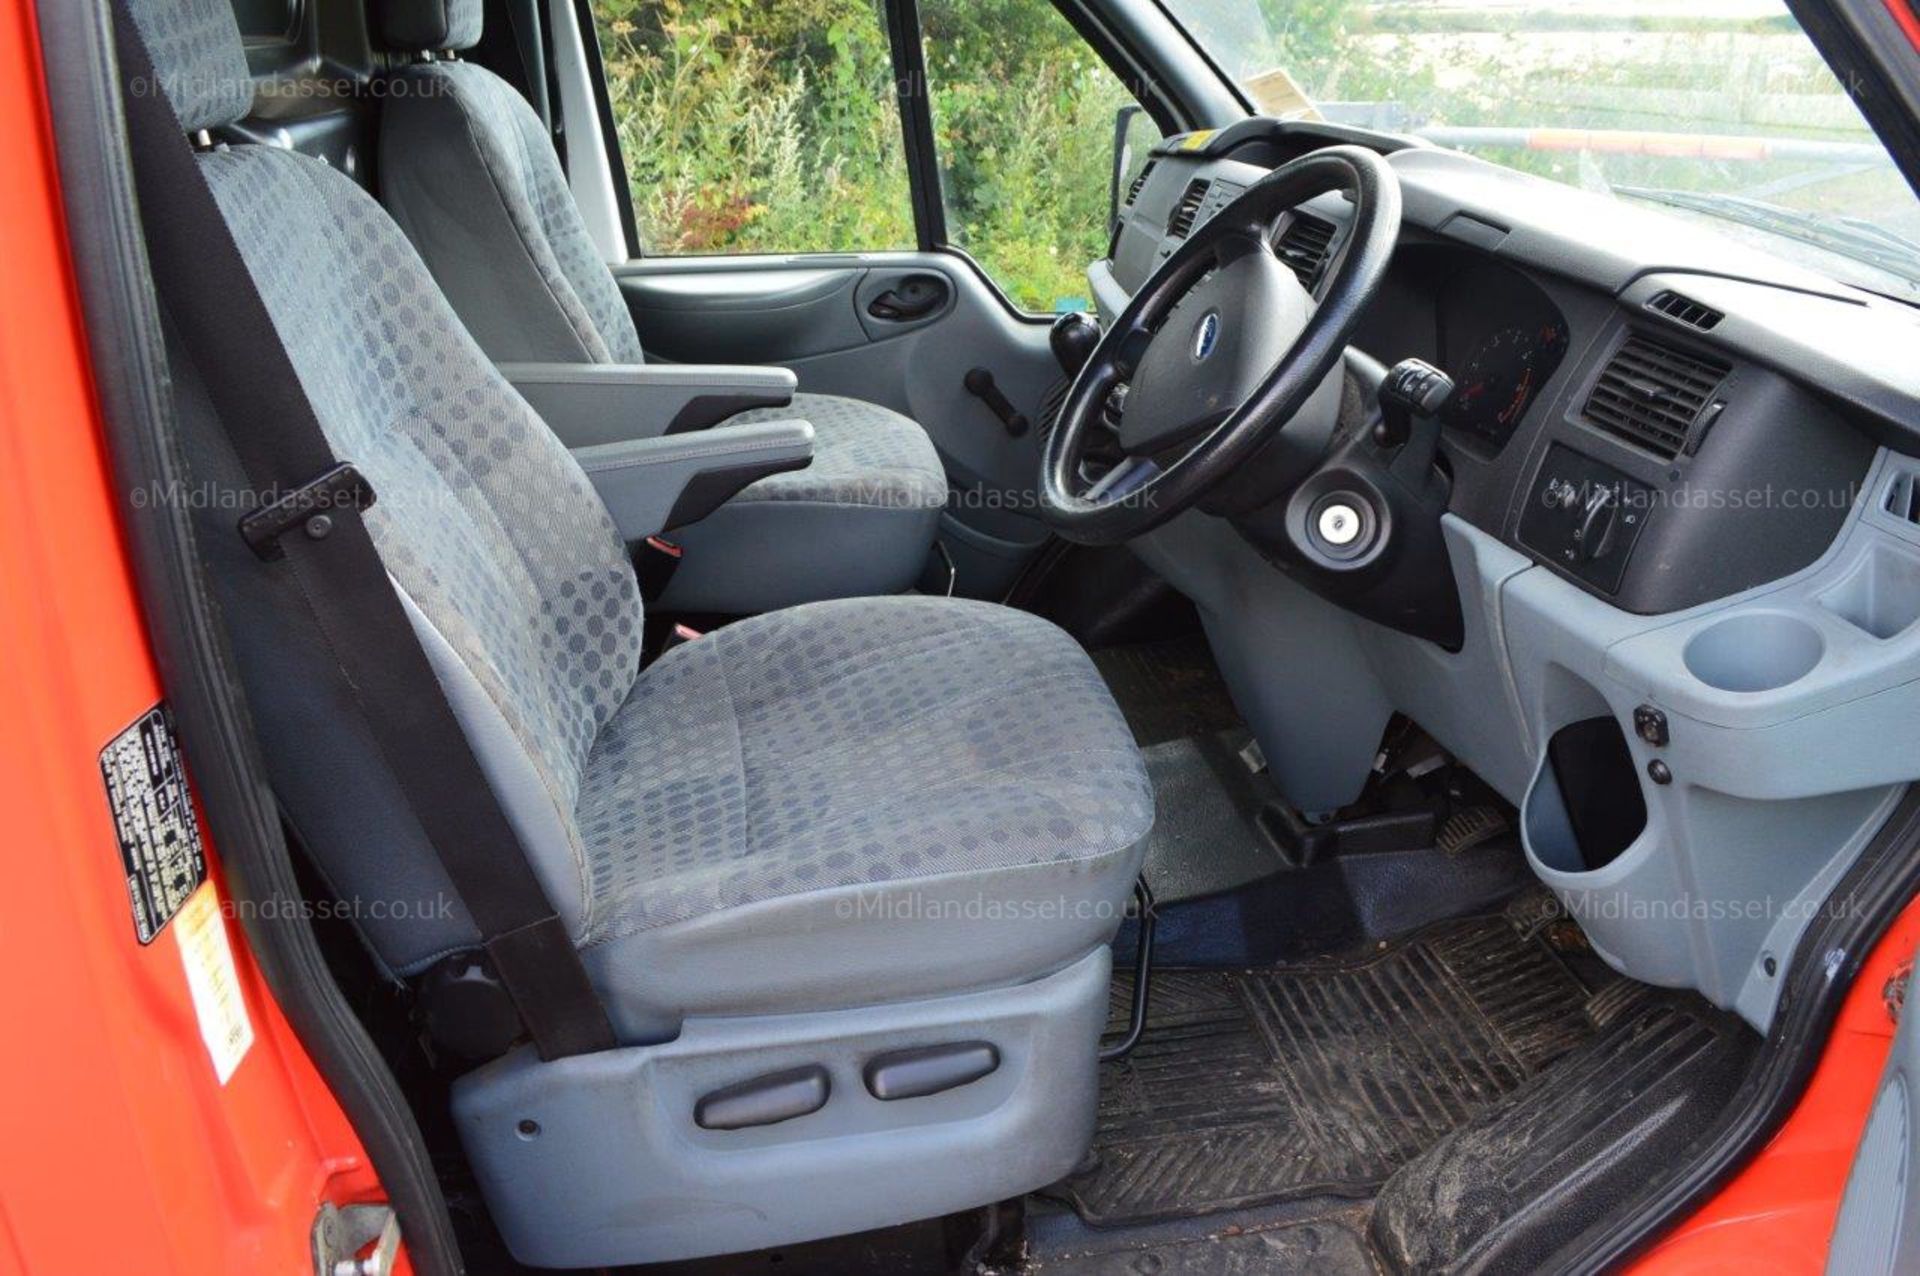 2008/08 REG FORD TRANSIT 110 T300S FWD PANEL VAN - AIR CONDITIONING *NO VAT* - Image 13 of 17